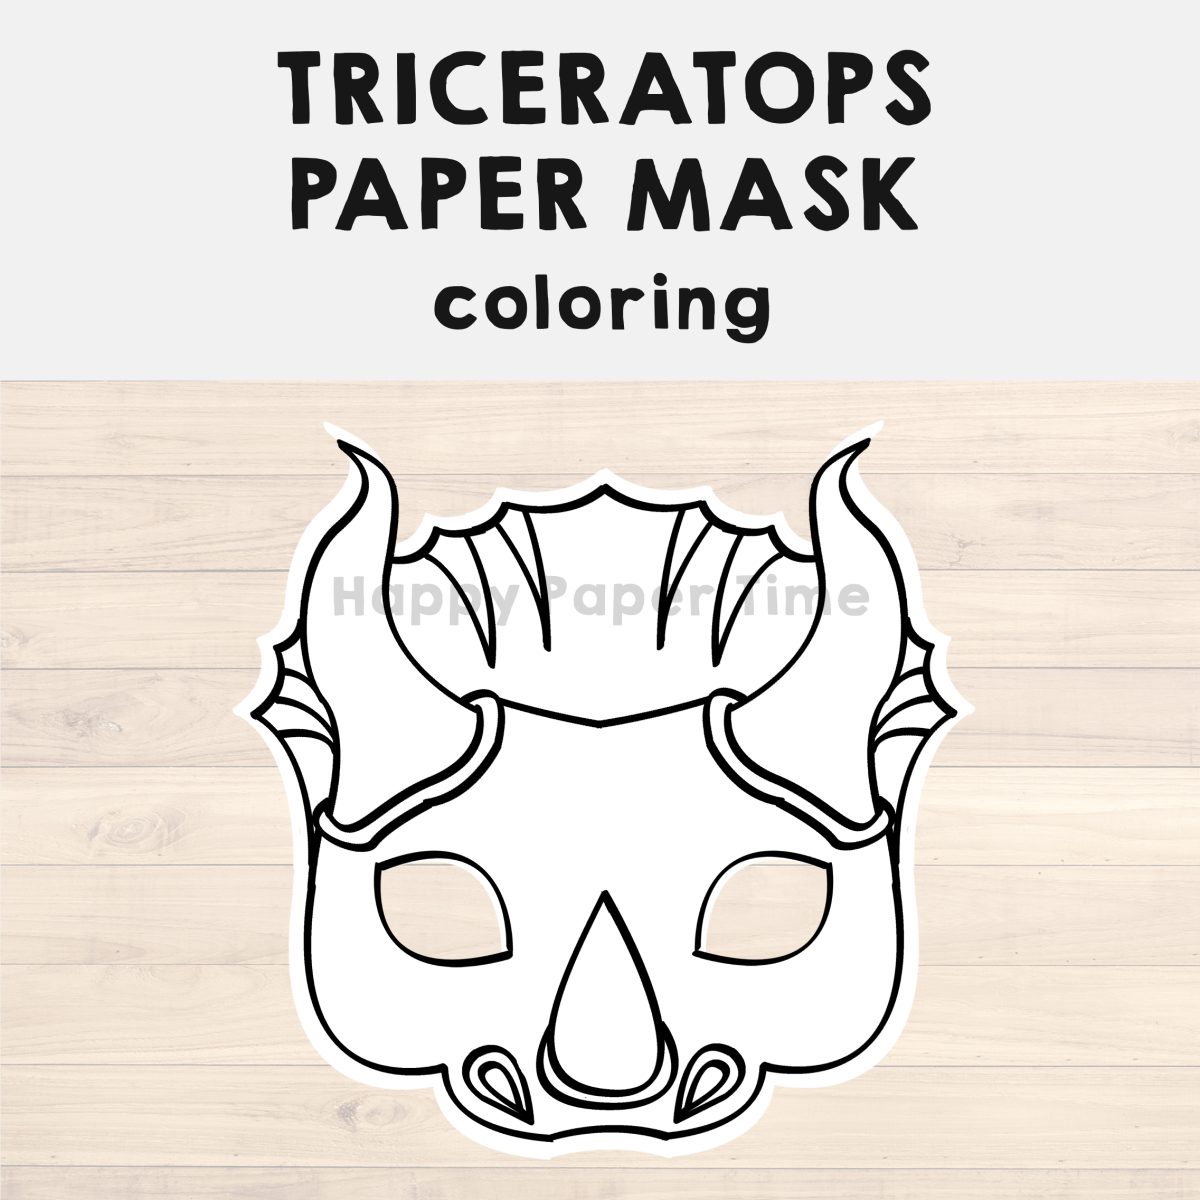 Triceratops paper mask printable dinosaur coloring craft activity costume made by teachers